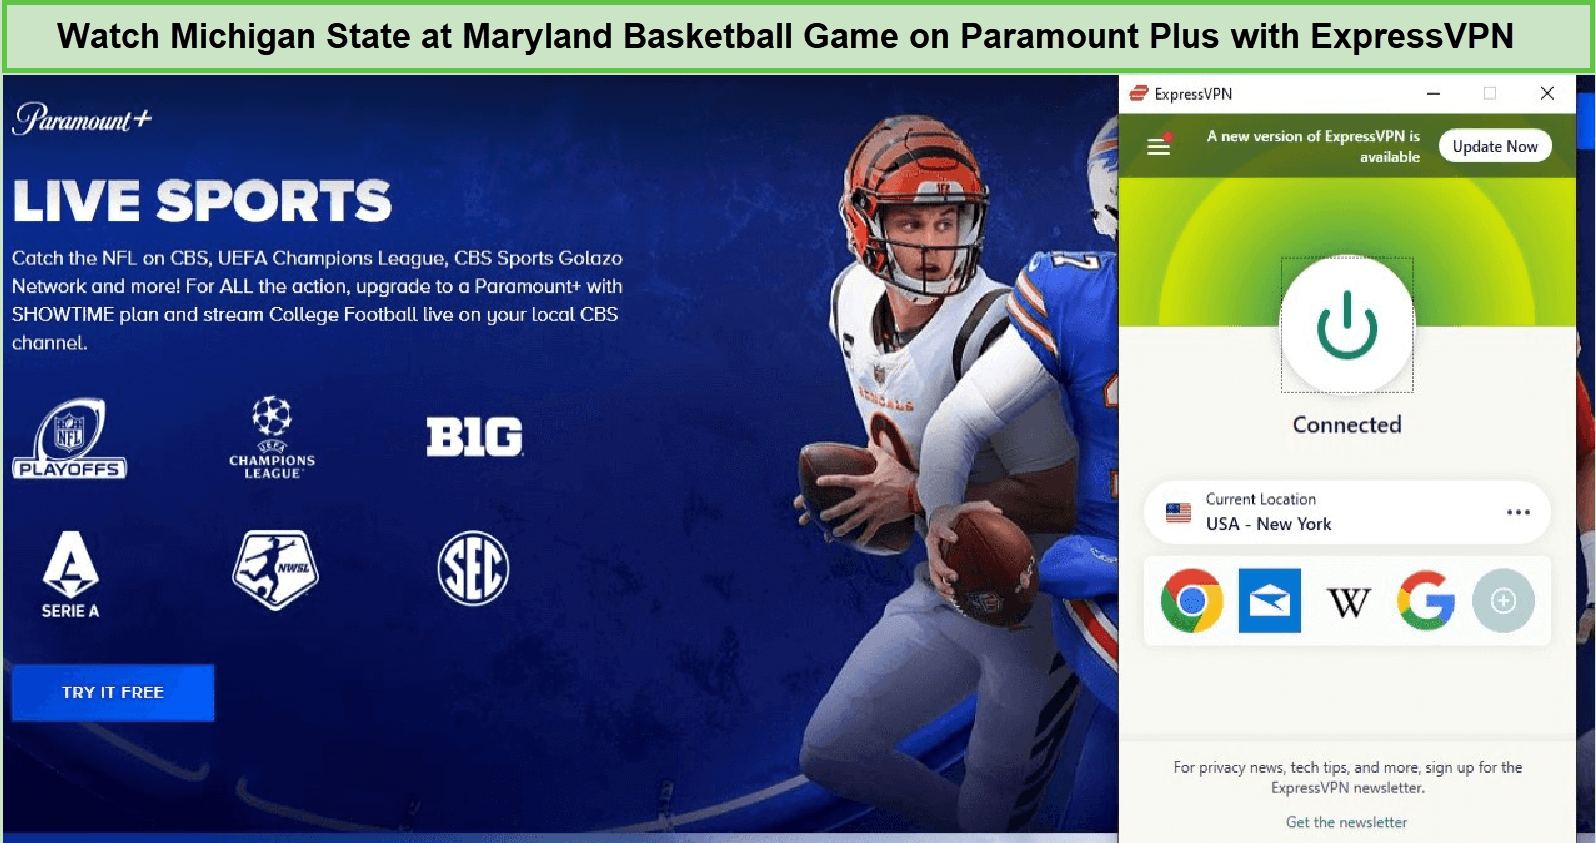 Watch-Michigan-State-at-Maryland-Basketball-Game-in-Italy-on-Paramount-Plus-with-ExpressVPN